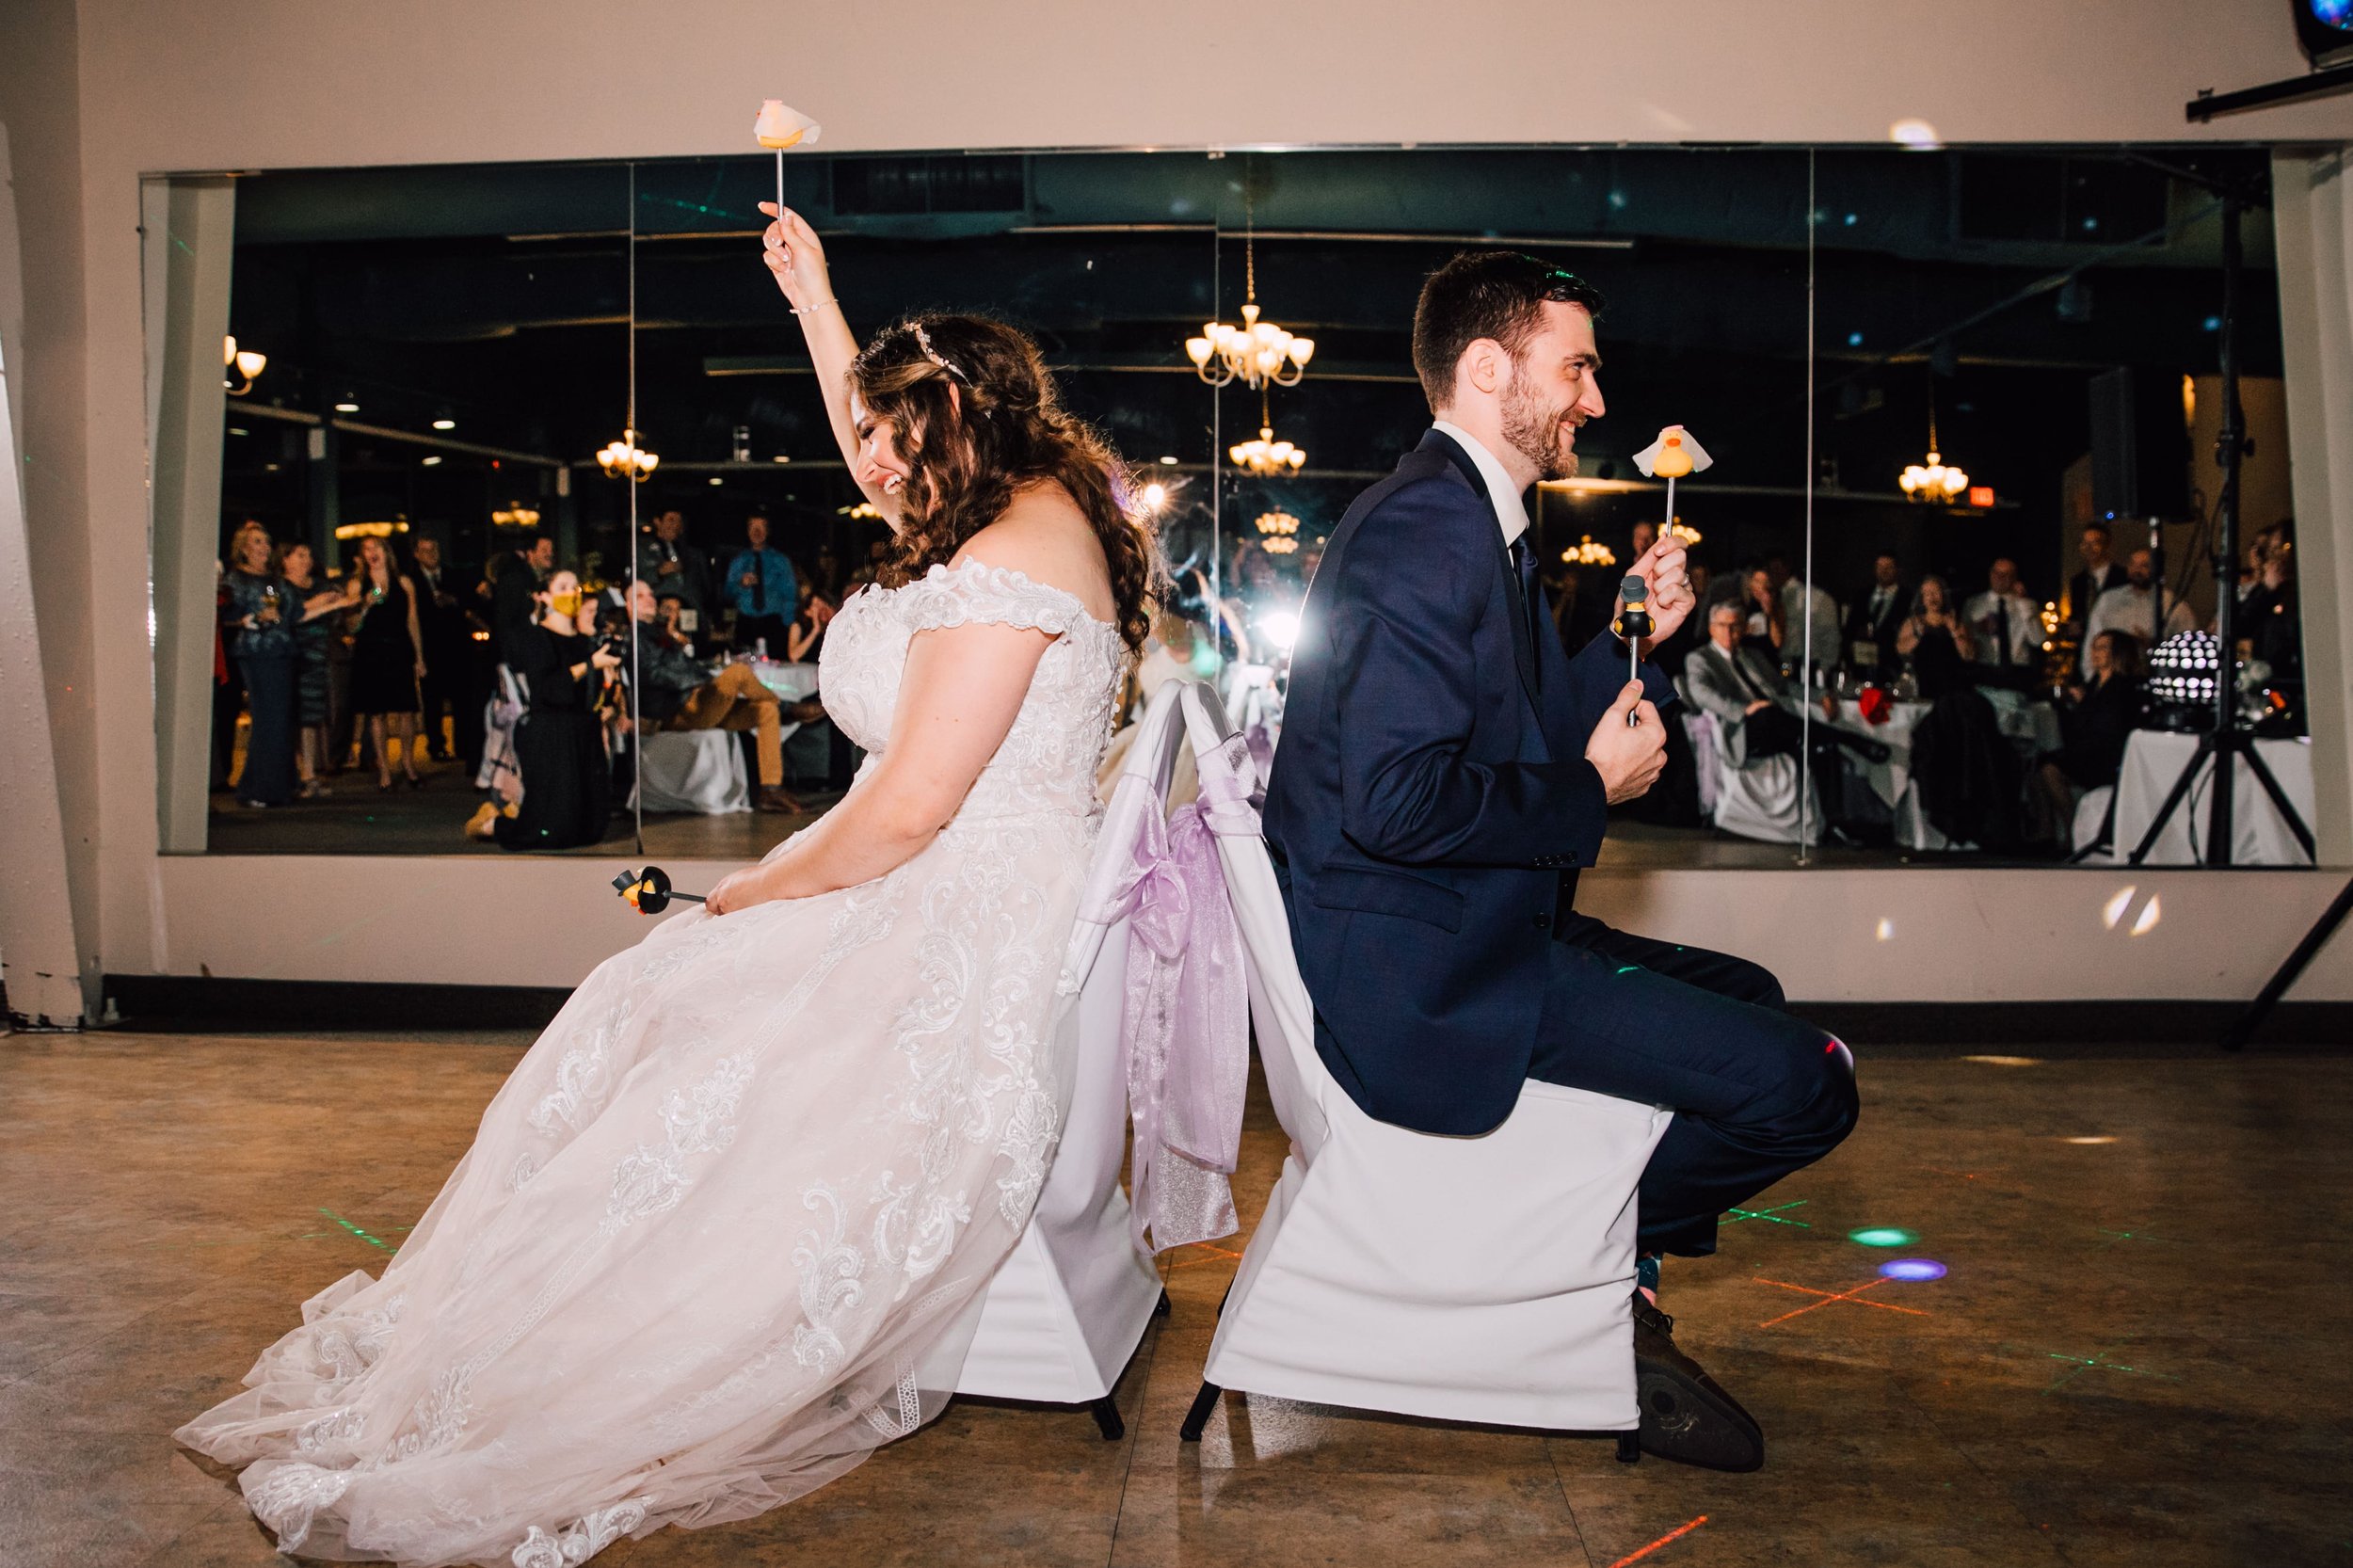  the bride and groom play the shoe game at their wedding reception at endwell greens 